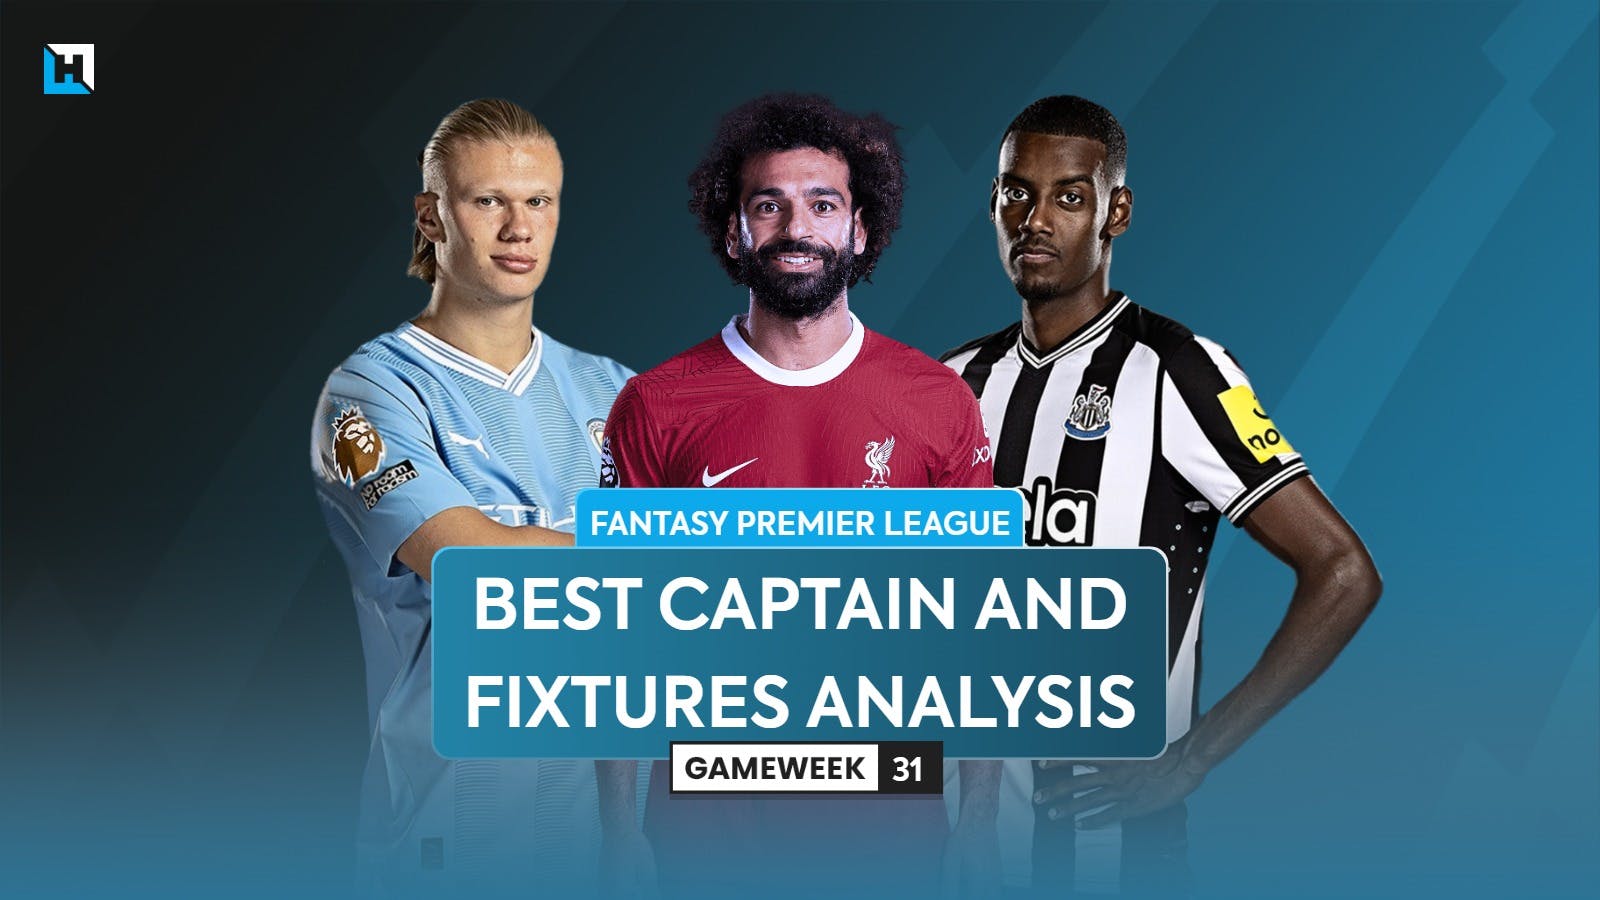 Who is the best FPL captain for Gameweek 31?